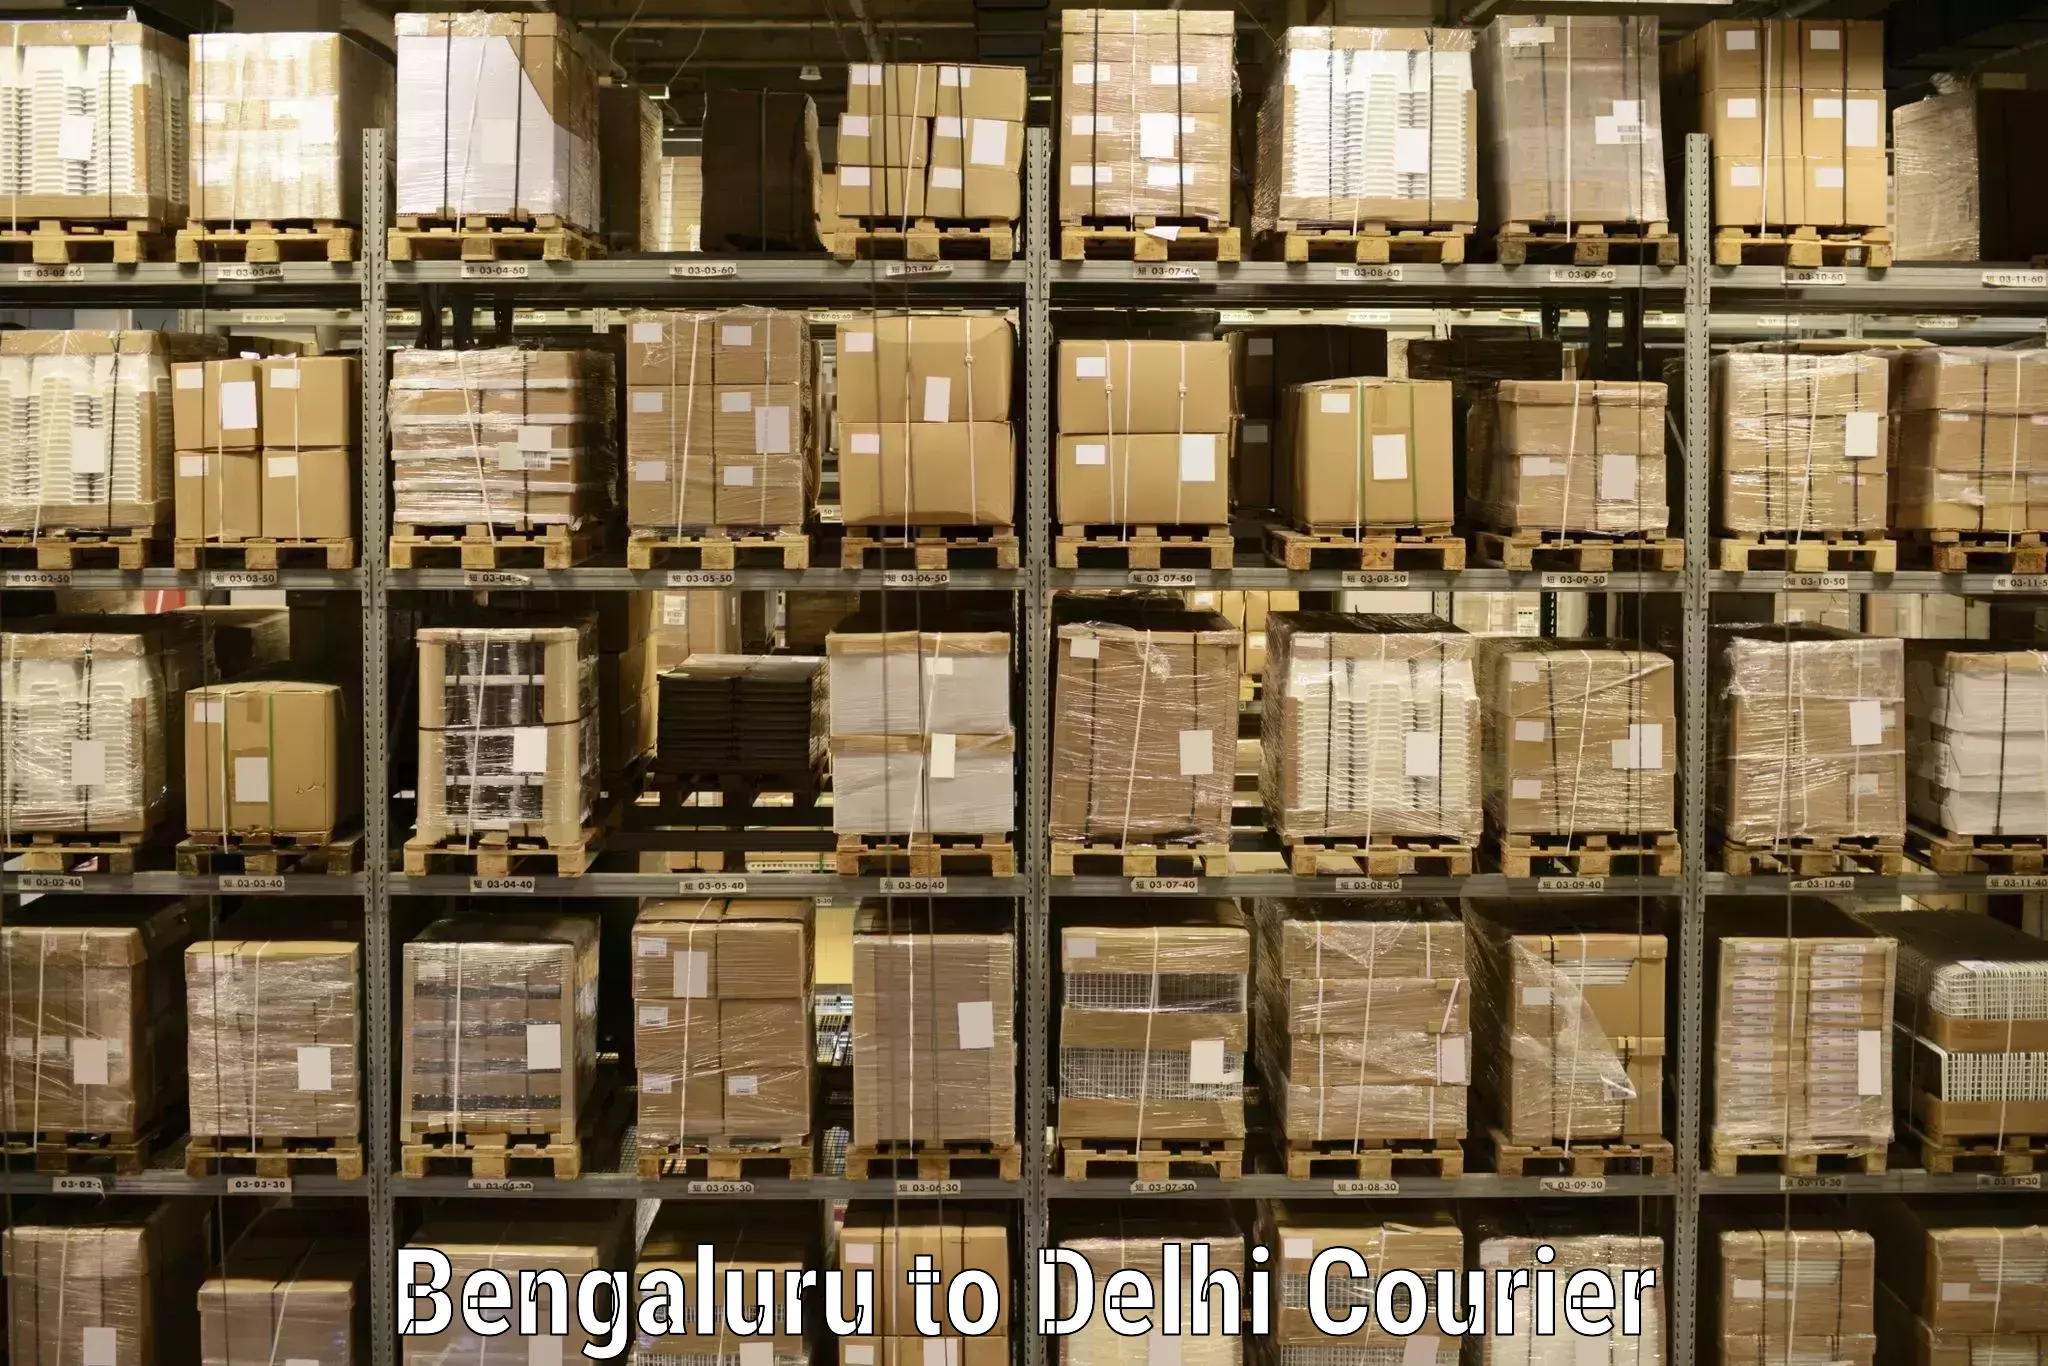 Efficient order fulfillment Bengaluru to NCR